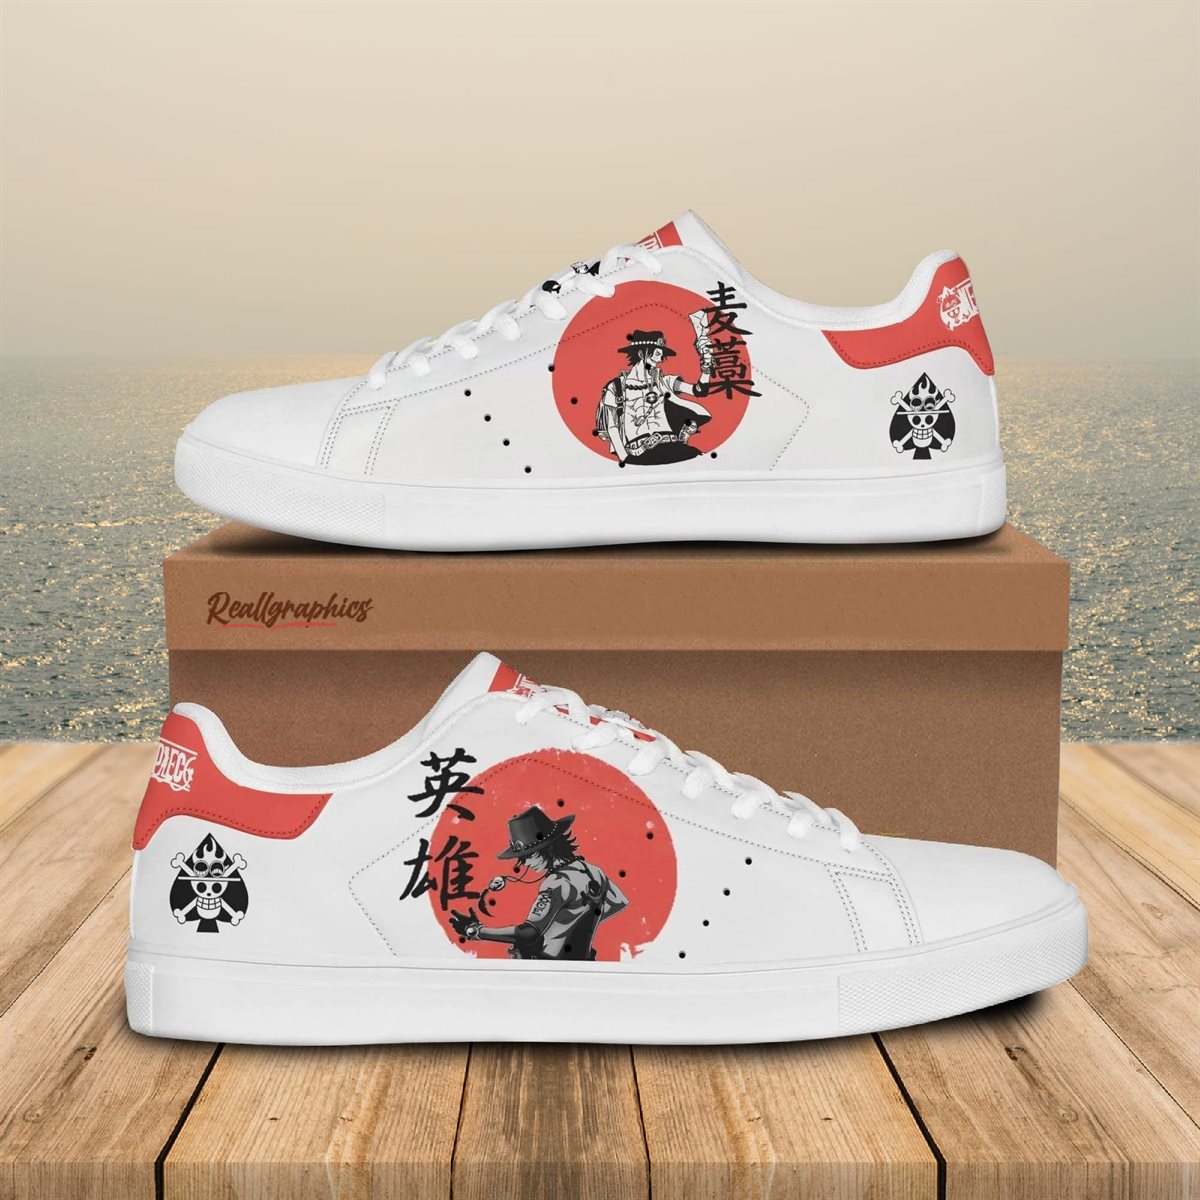 One Piece Anime Sneakers  One Piece Shoes Sneakers  Animation  Derivativesperipheral Products  Aliexpress